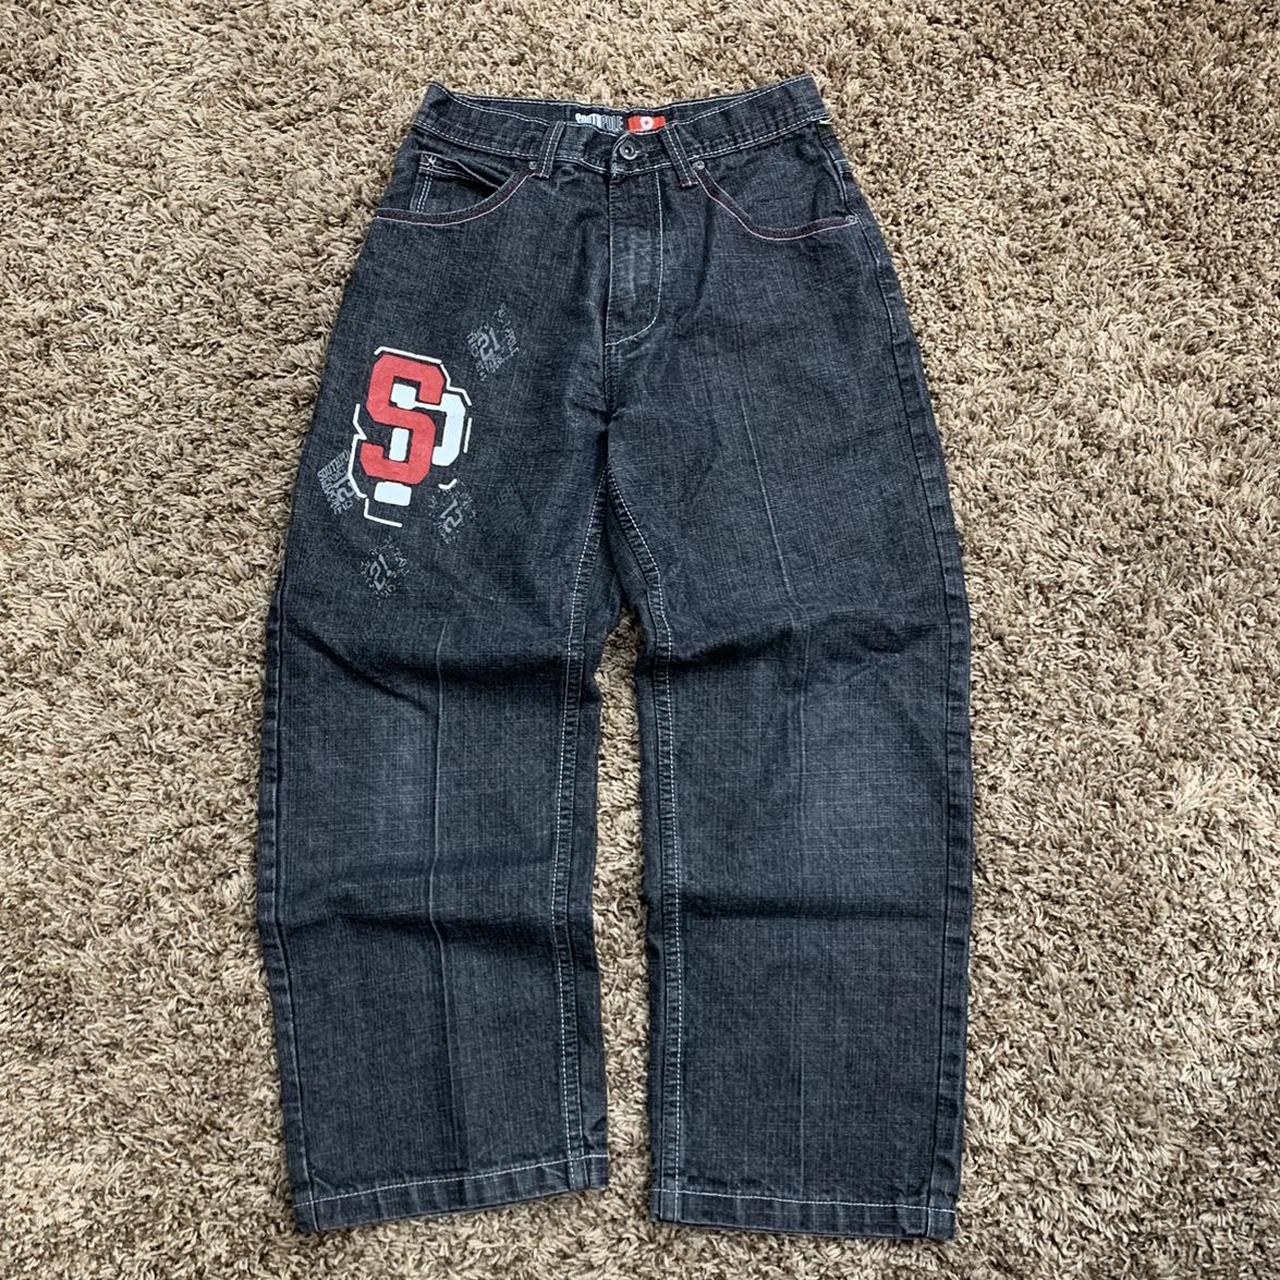 Women's Black and Red Jeans | Depop